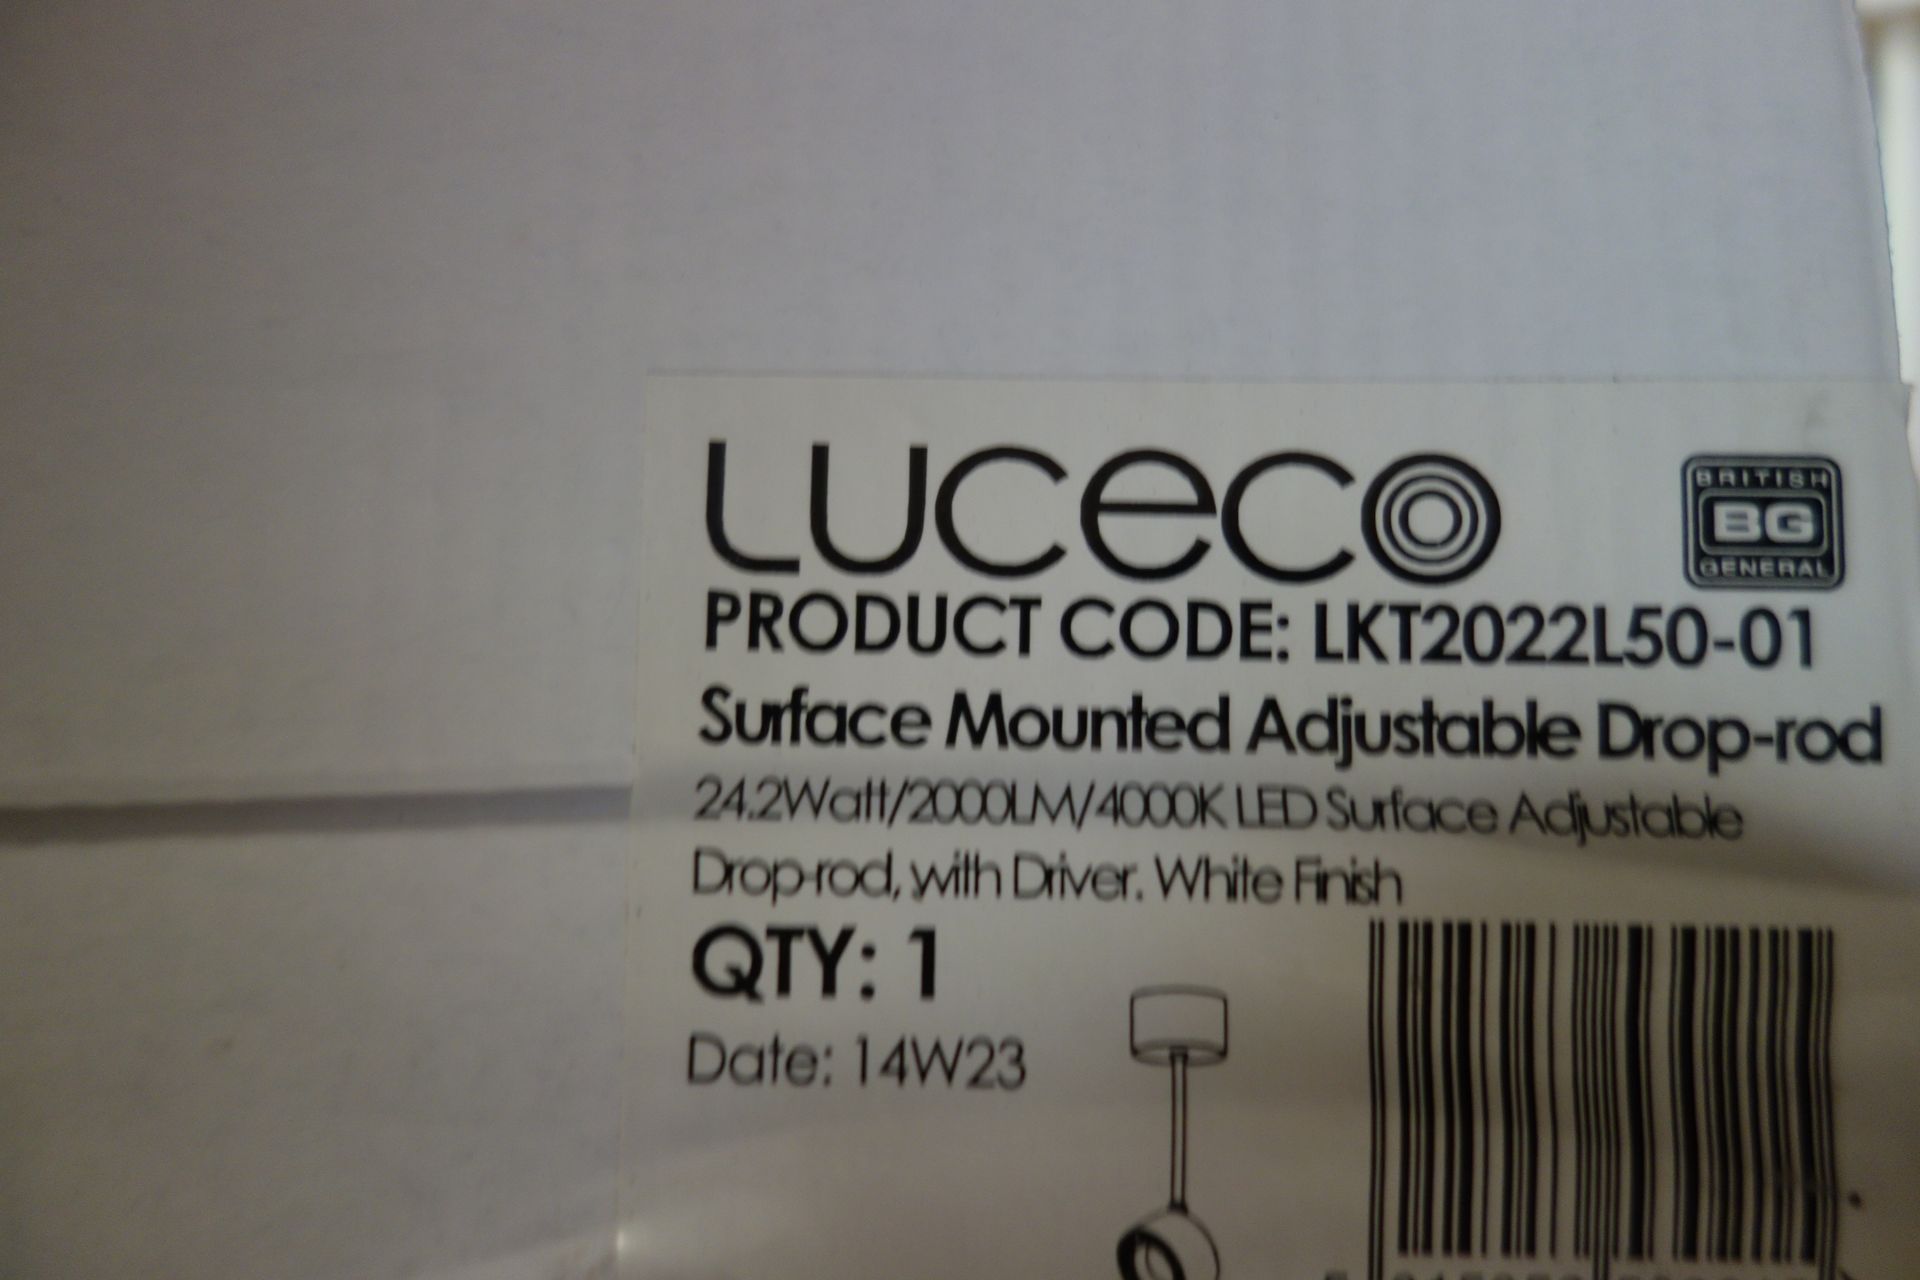 6 X LUCECO LKT2022L50-01 24-2 W LED Surface Adjustable Drop-Rod With Driver White Finish 2000